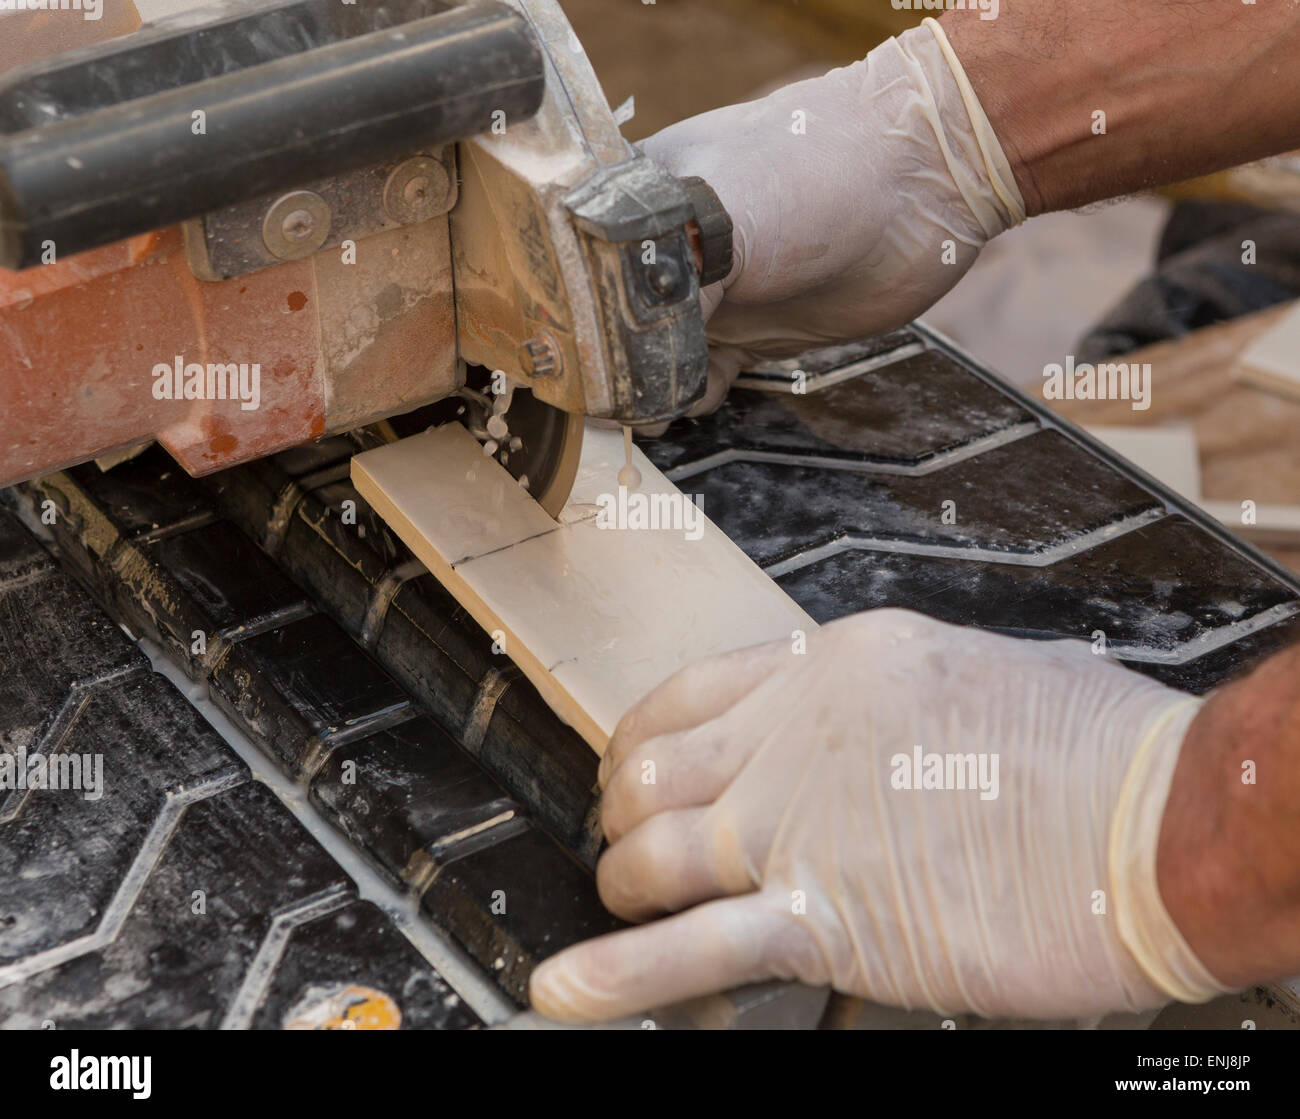 ARLINGTON, VIRGINIA, USA - Worker wearing latex gloves cuts ceramic tiles with a wet tile saw. Stock Photo